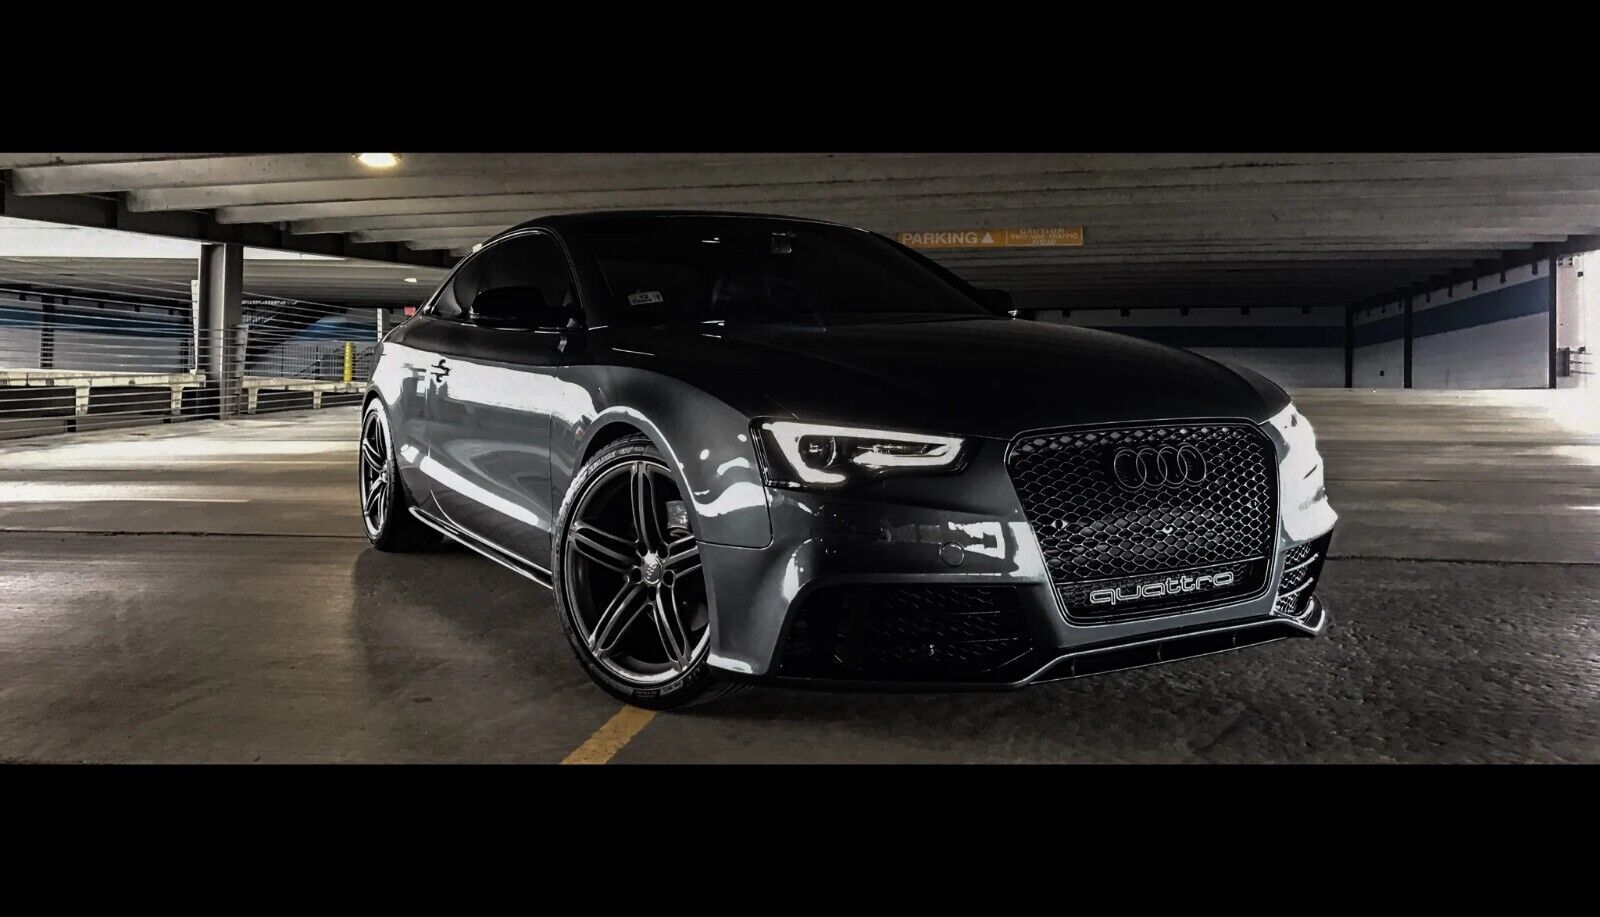 AUDI RS5 STYLE B8.5 FRONT BUMPER FOR A5/S5  FULL SET INCLUDED